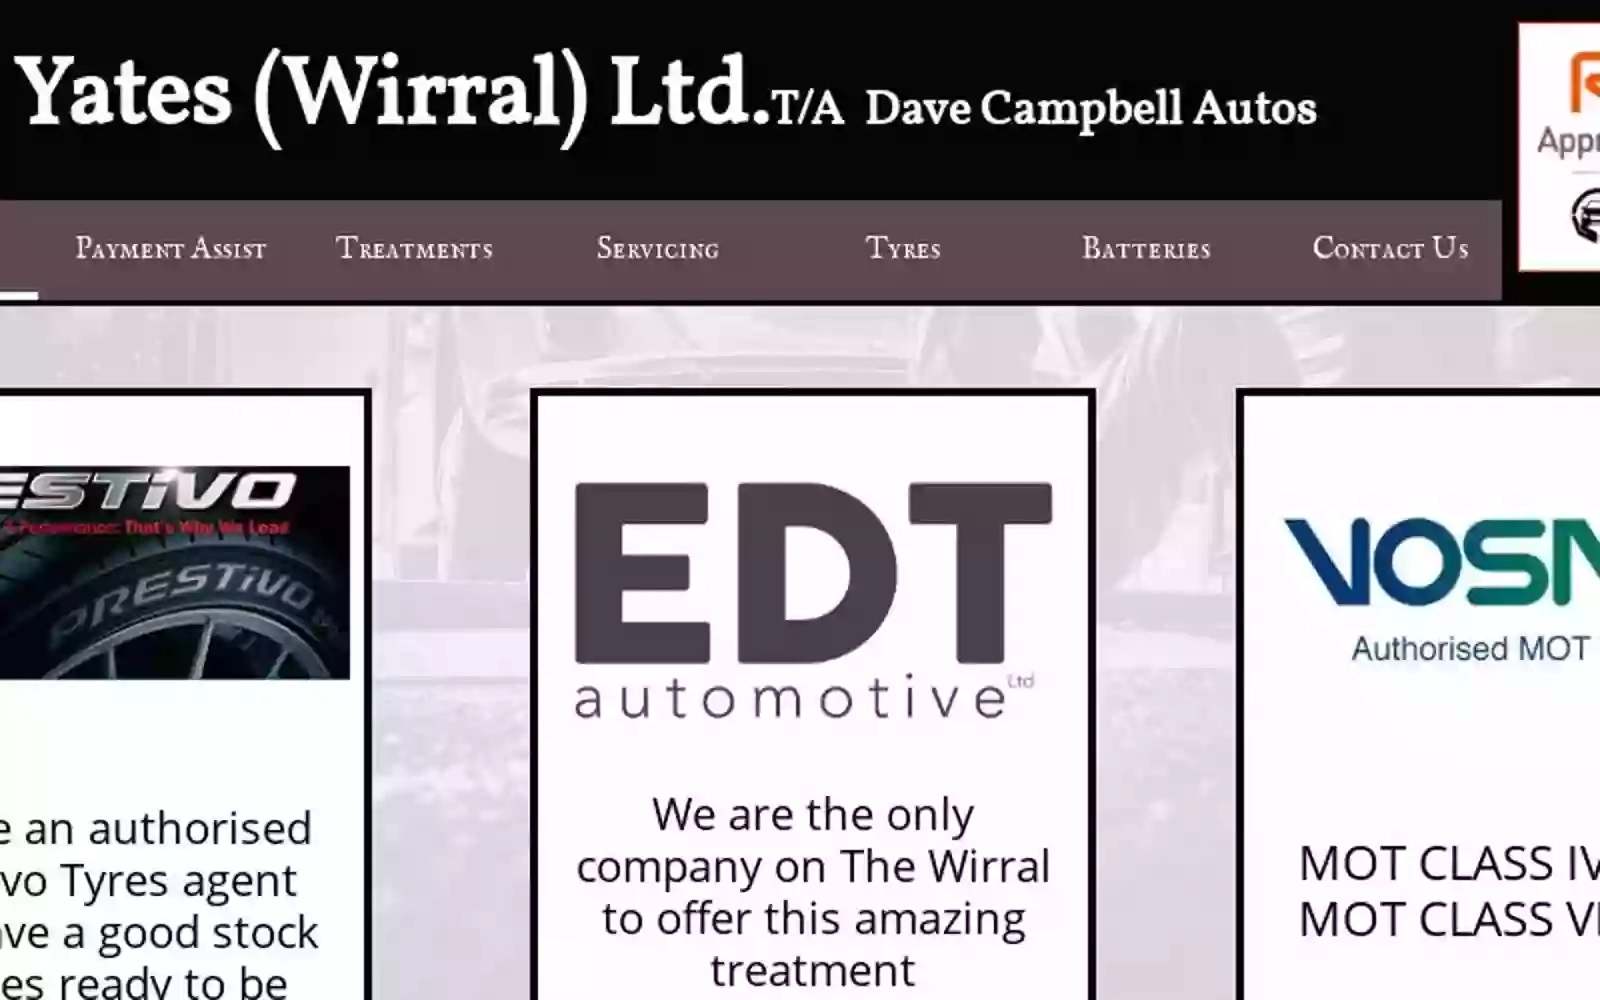 Paul Yates (Wirral) Ltd T/A Dave Campbell Autos (EDT Wirral) RAC Approved